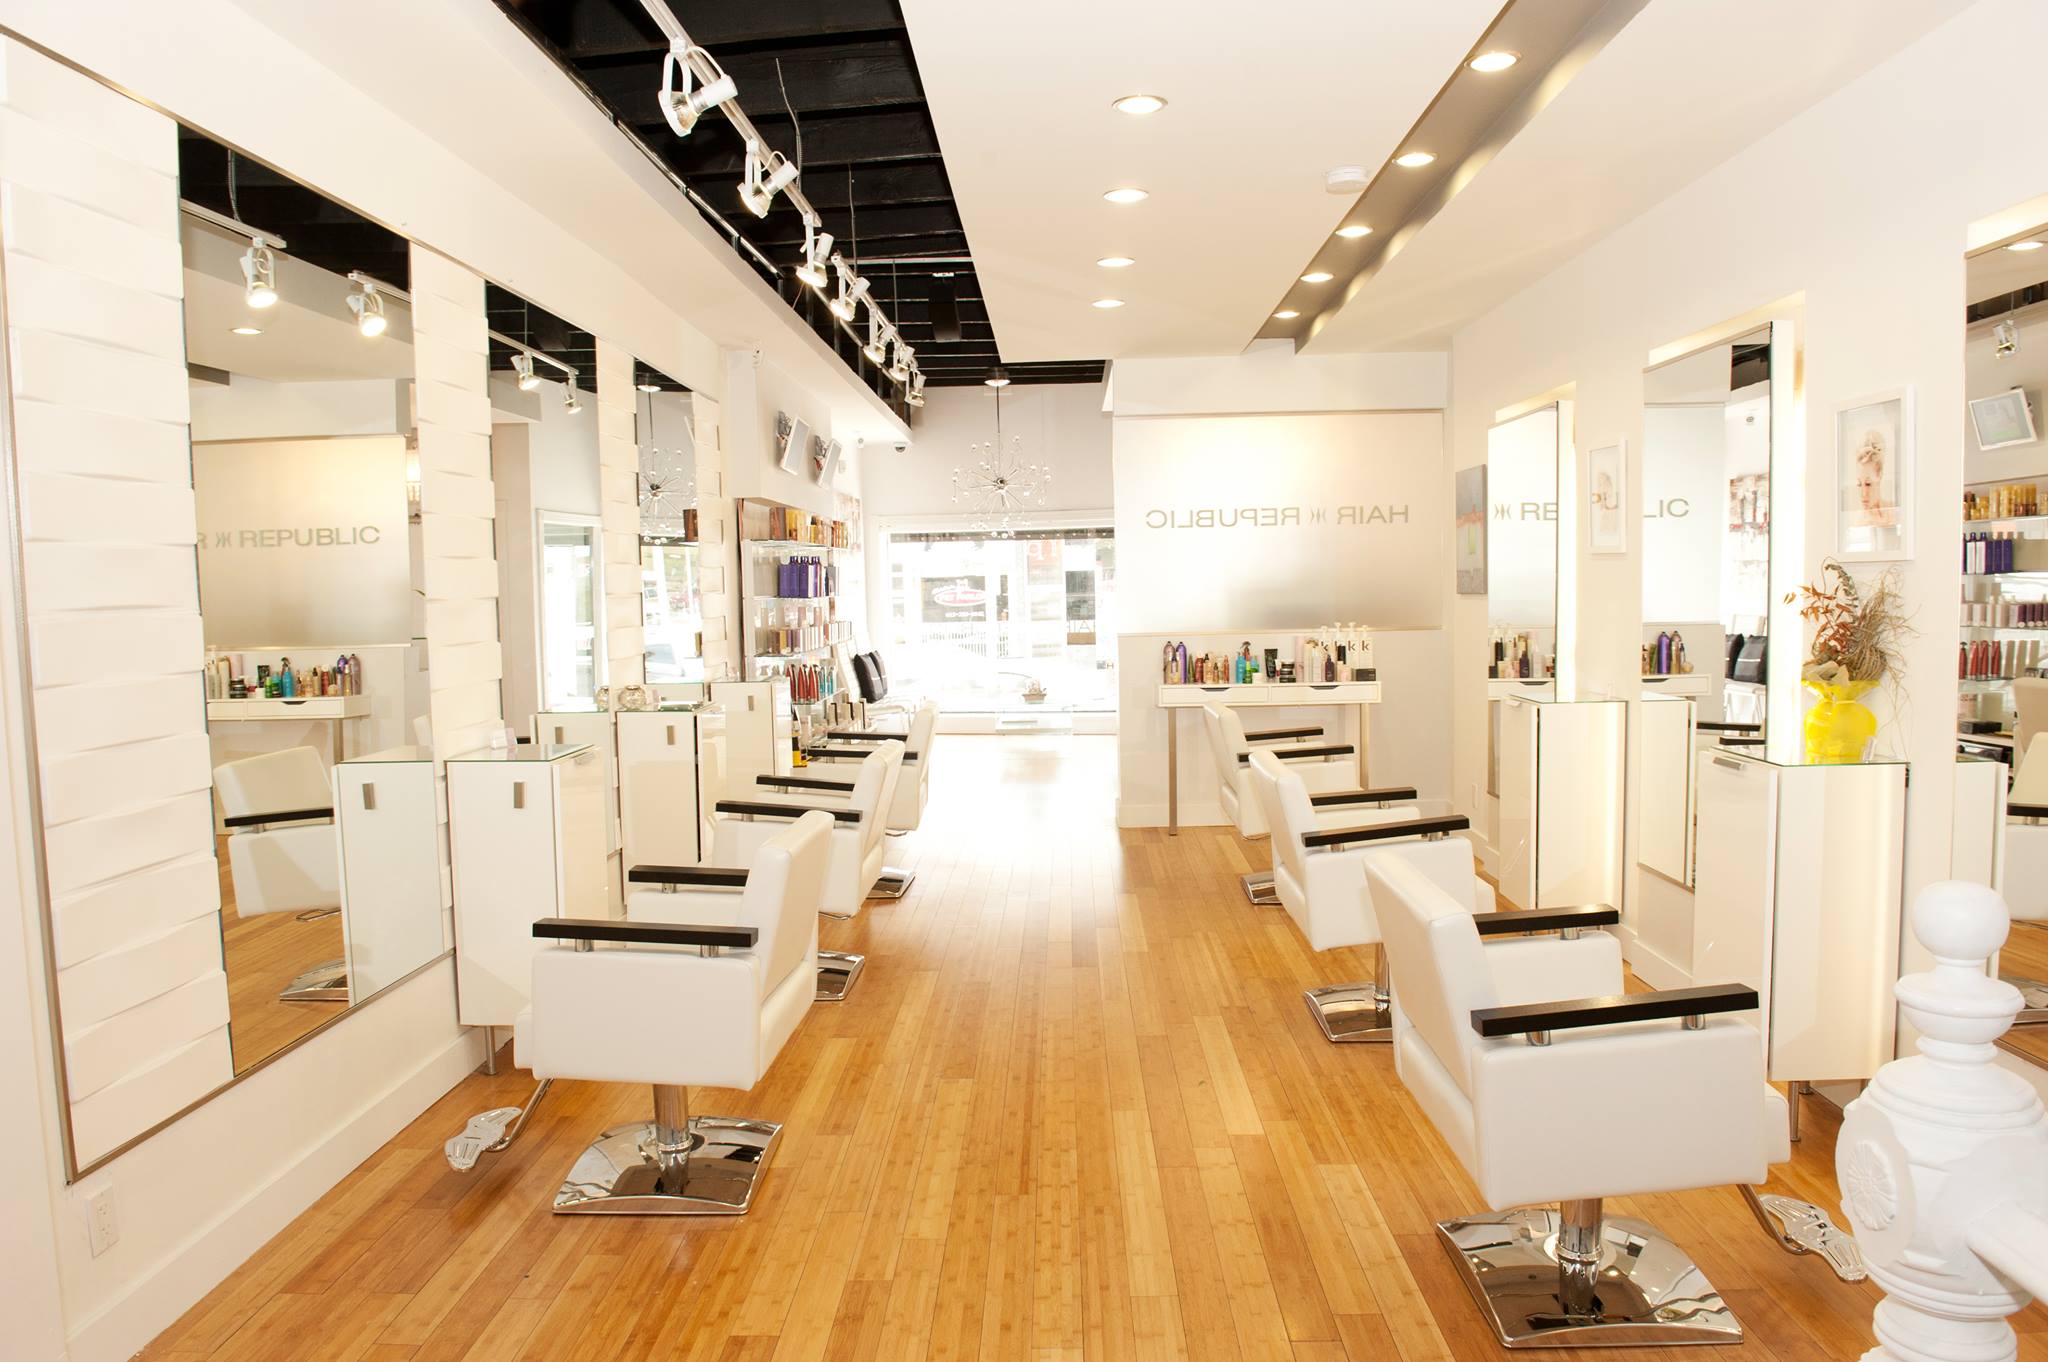 9. "The Top Hair Salons for Sky Silver Blue Hair Color" - wide 3